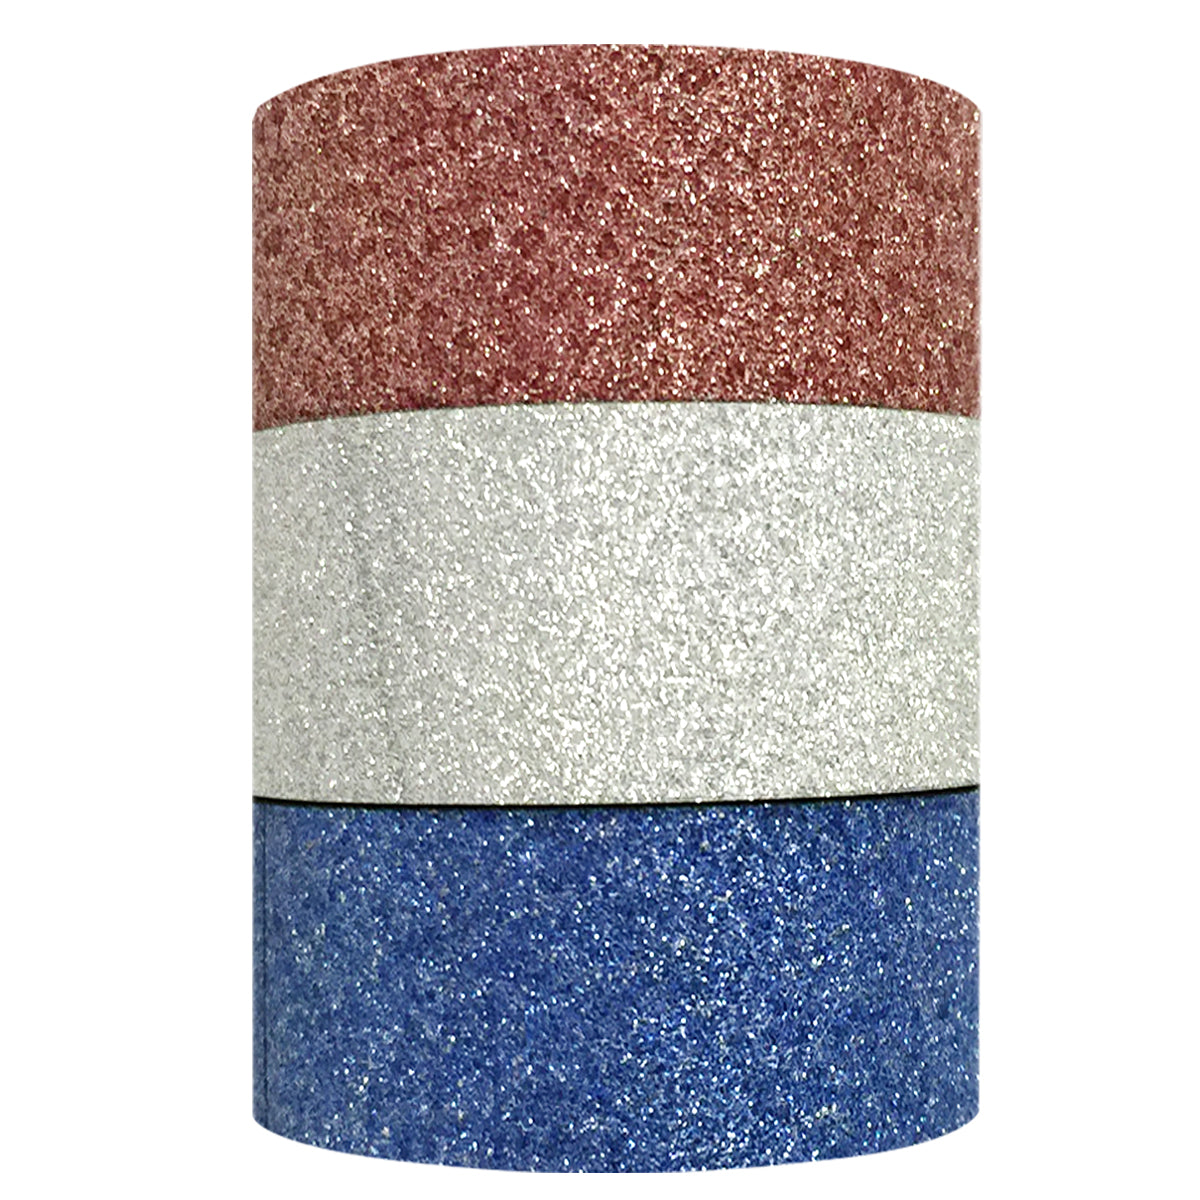 Wrapables Red White and Glitter Washi Masking Tape (Set of 3)